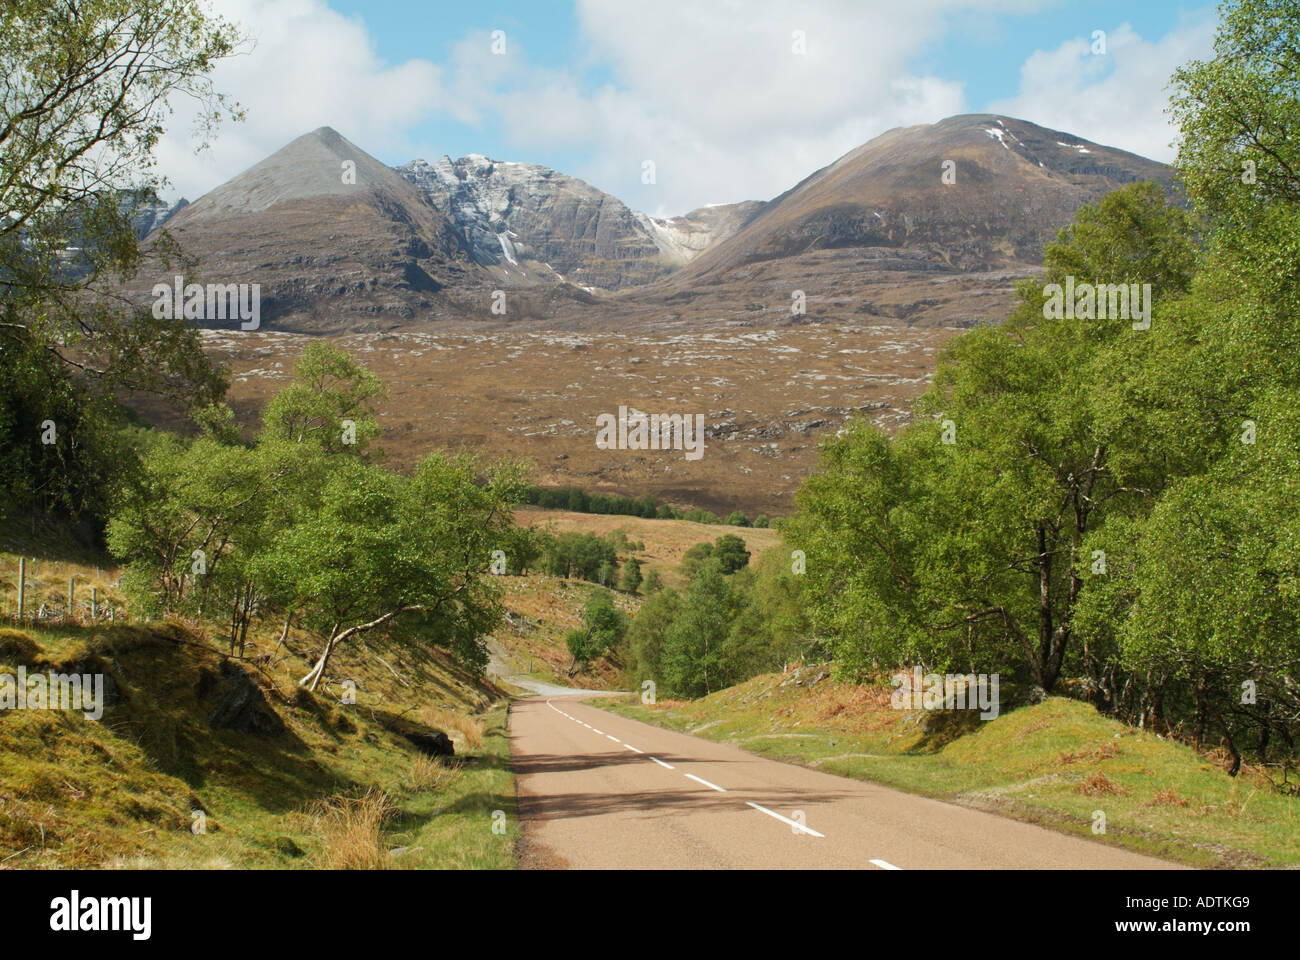 The An Teallach range from the A832 near Dundonnell, Wester Ross, Scotland, UK. Stock Photo